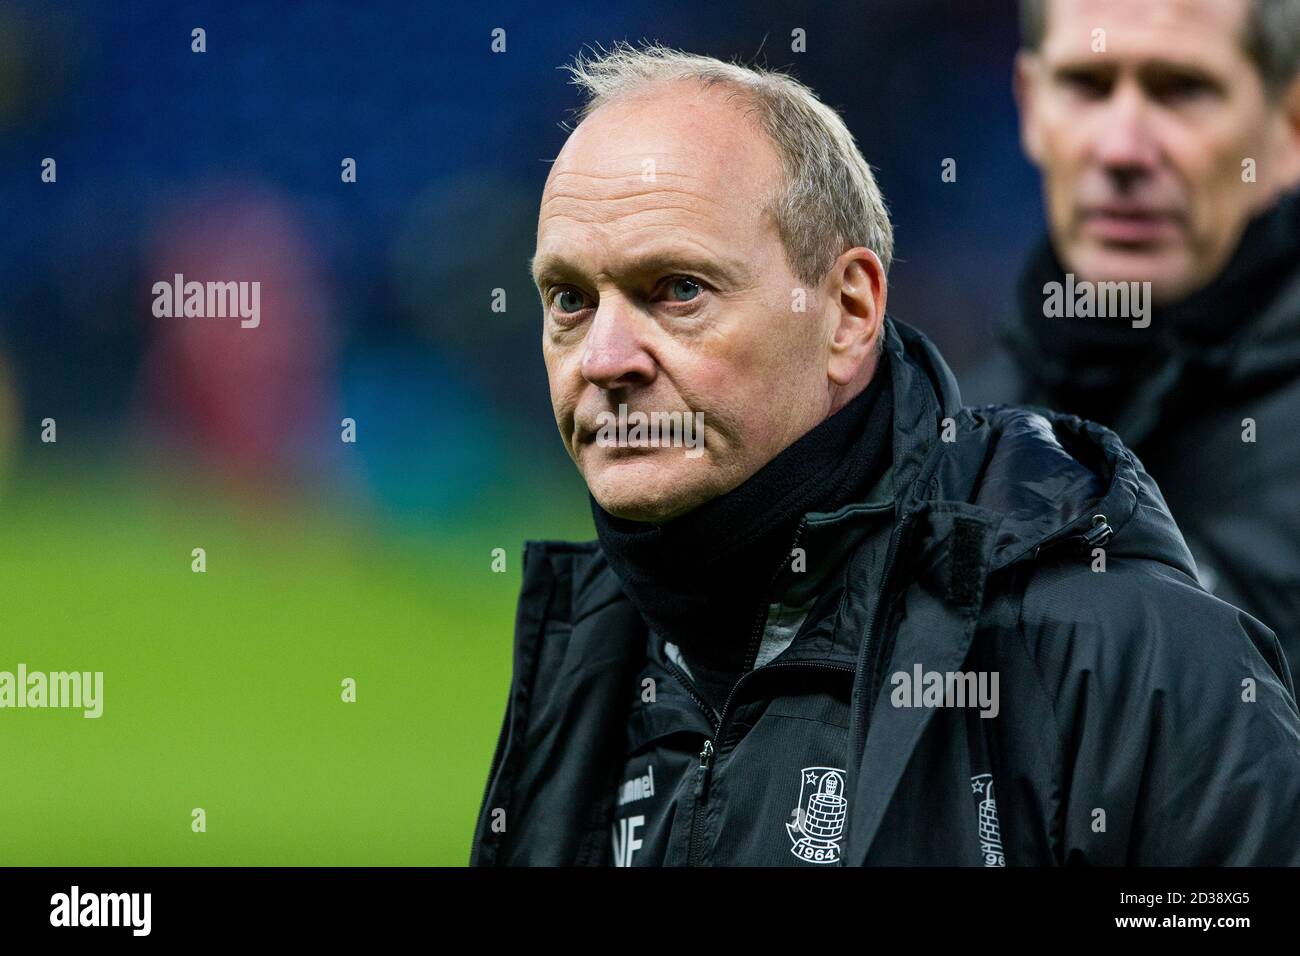 instruktør udløser Halvtreds Brondby, Denmark. 01st, March 2020. Head coach Niels Frederiksen of  Broendby IF seen during the 3F Superliga match between Broendby IF and  Lyngby Boldklub at Brondby Stadium. (Photo credit: Gonzales Photo -